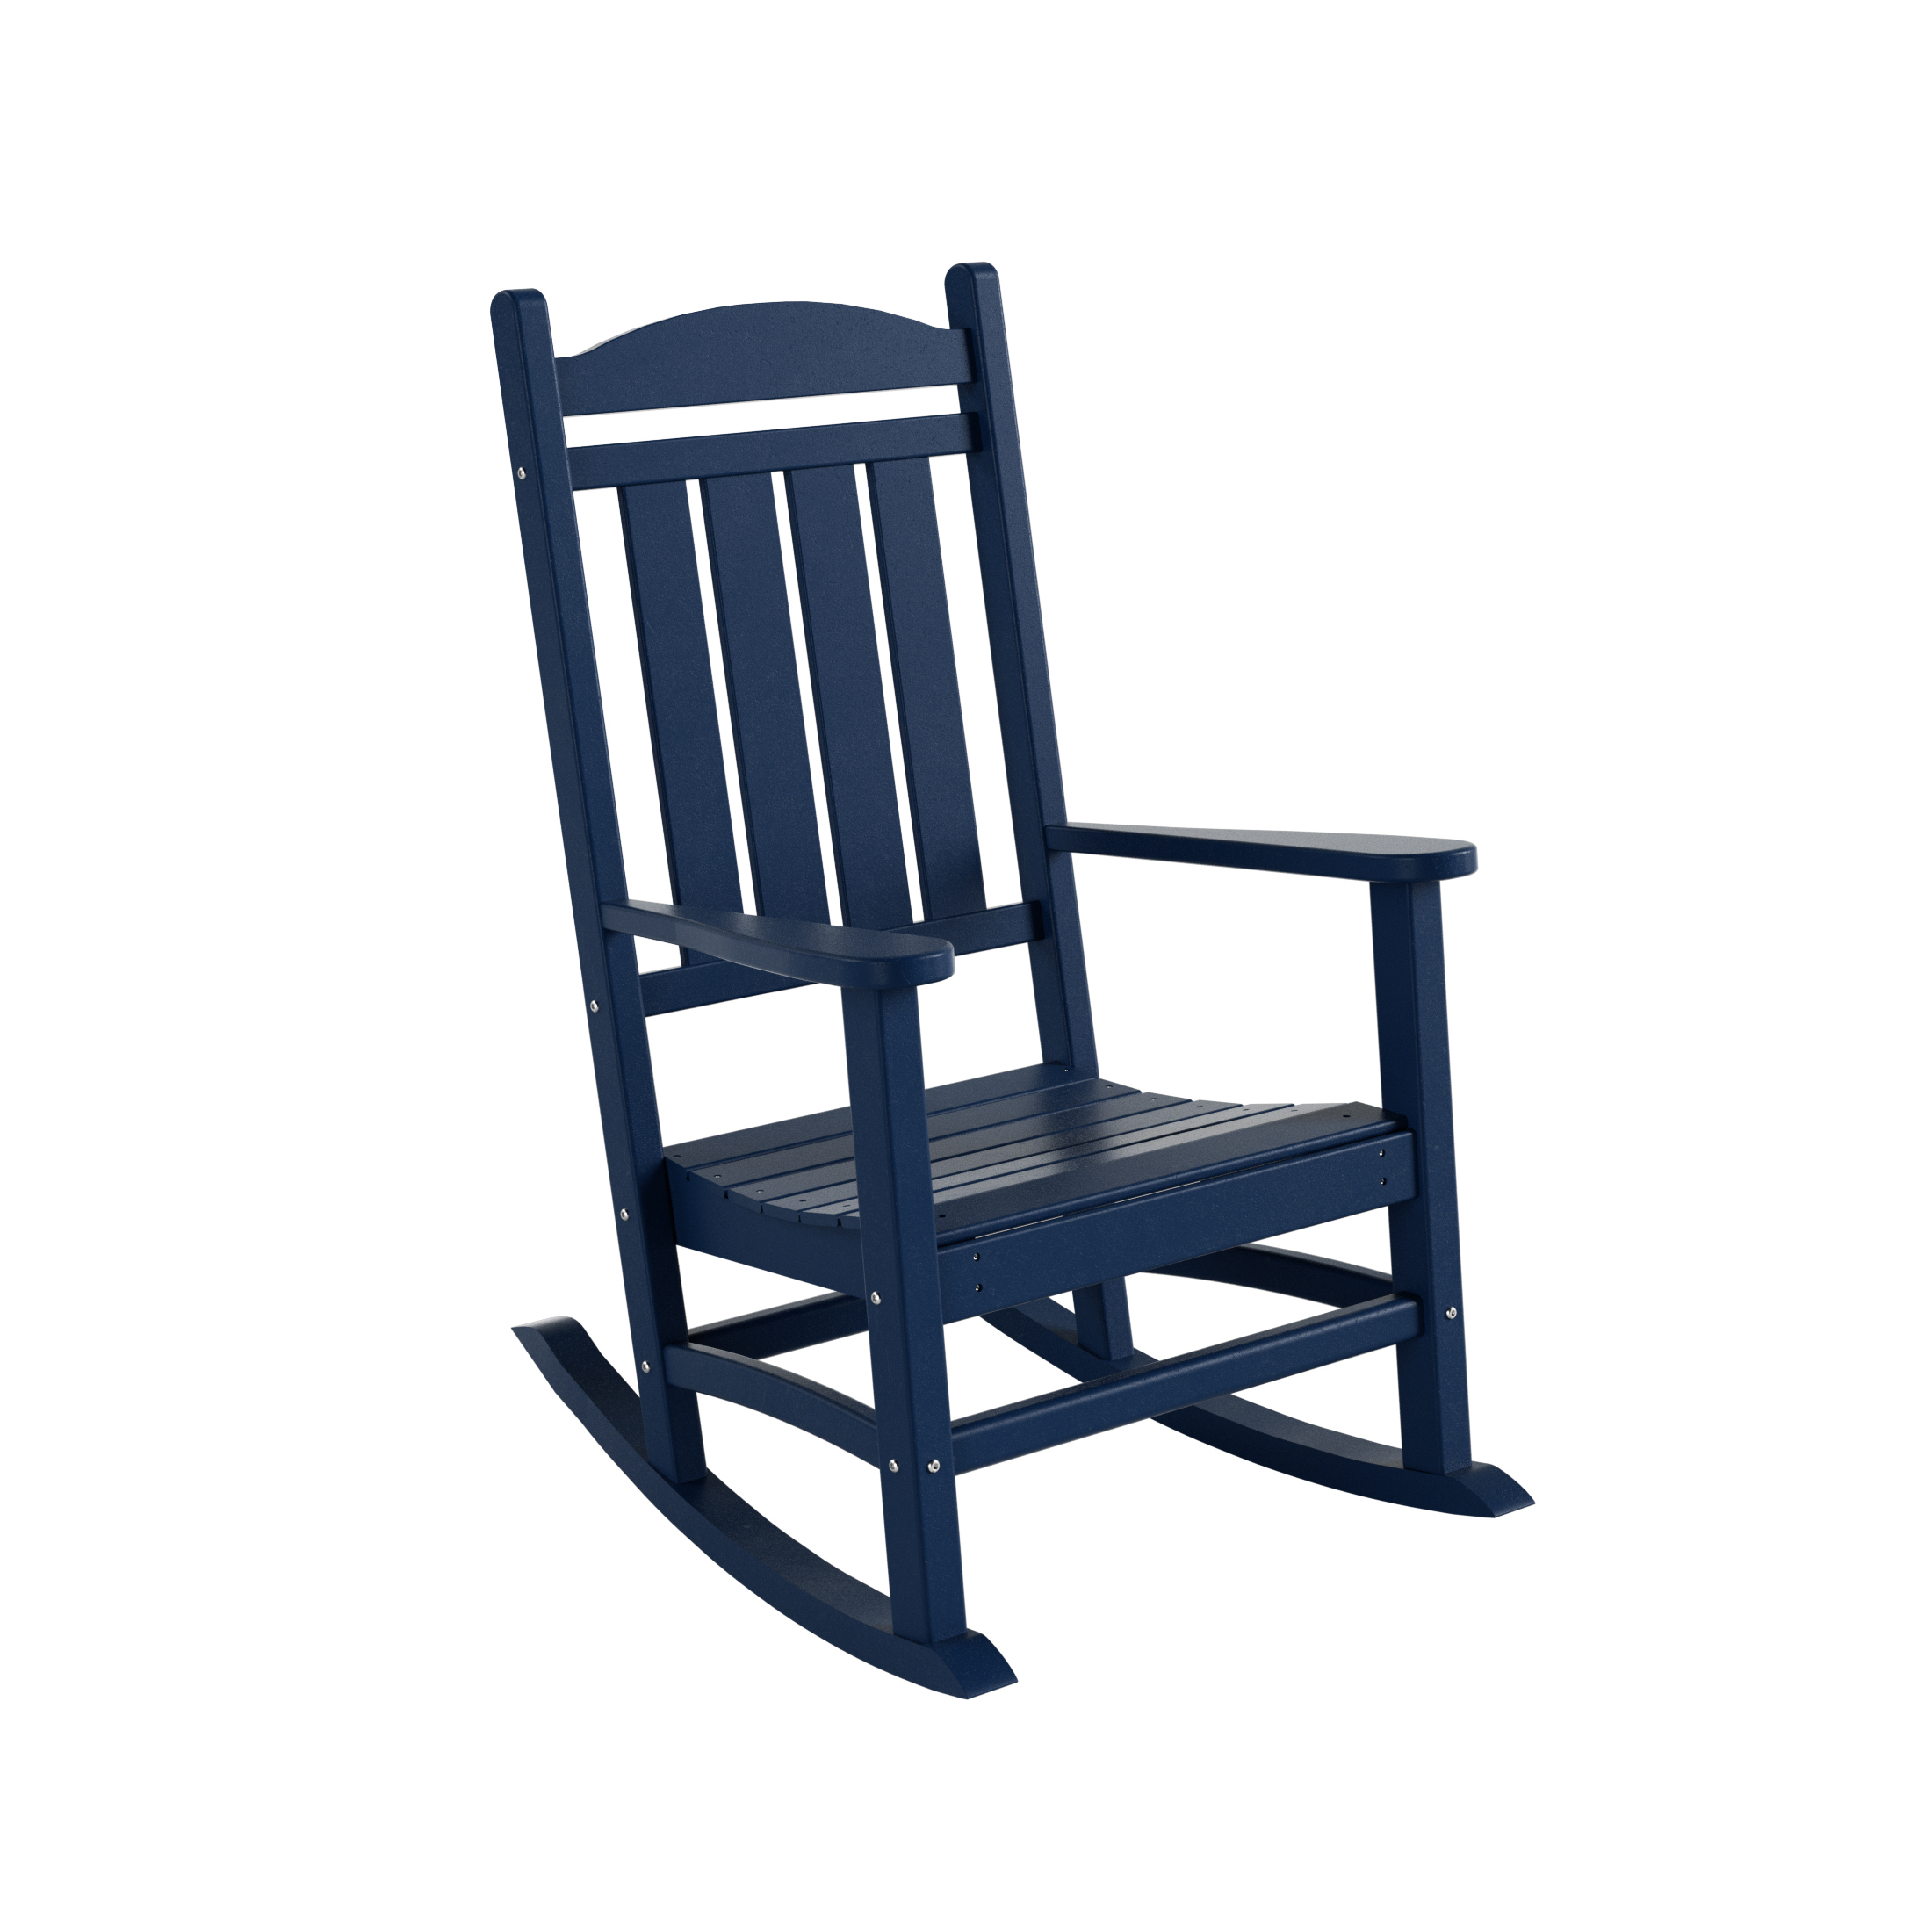 GARDEN 2-Piece Set Classic Plastic Porch Rocking Chair with Round Side Table Included, Navy Blue - image 4 of 7